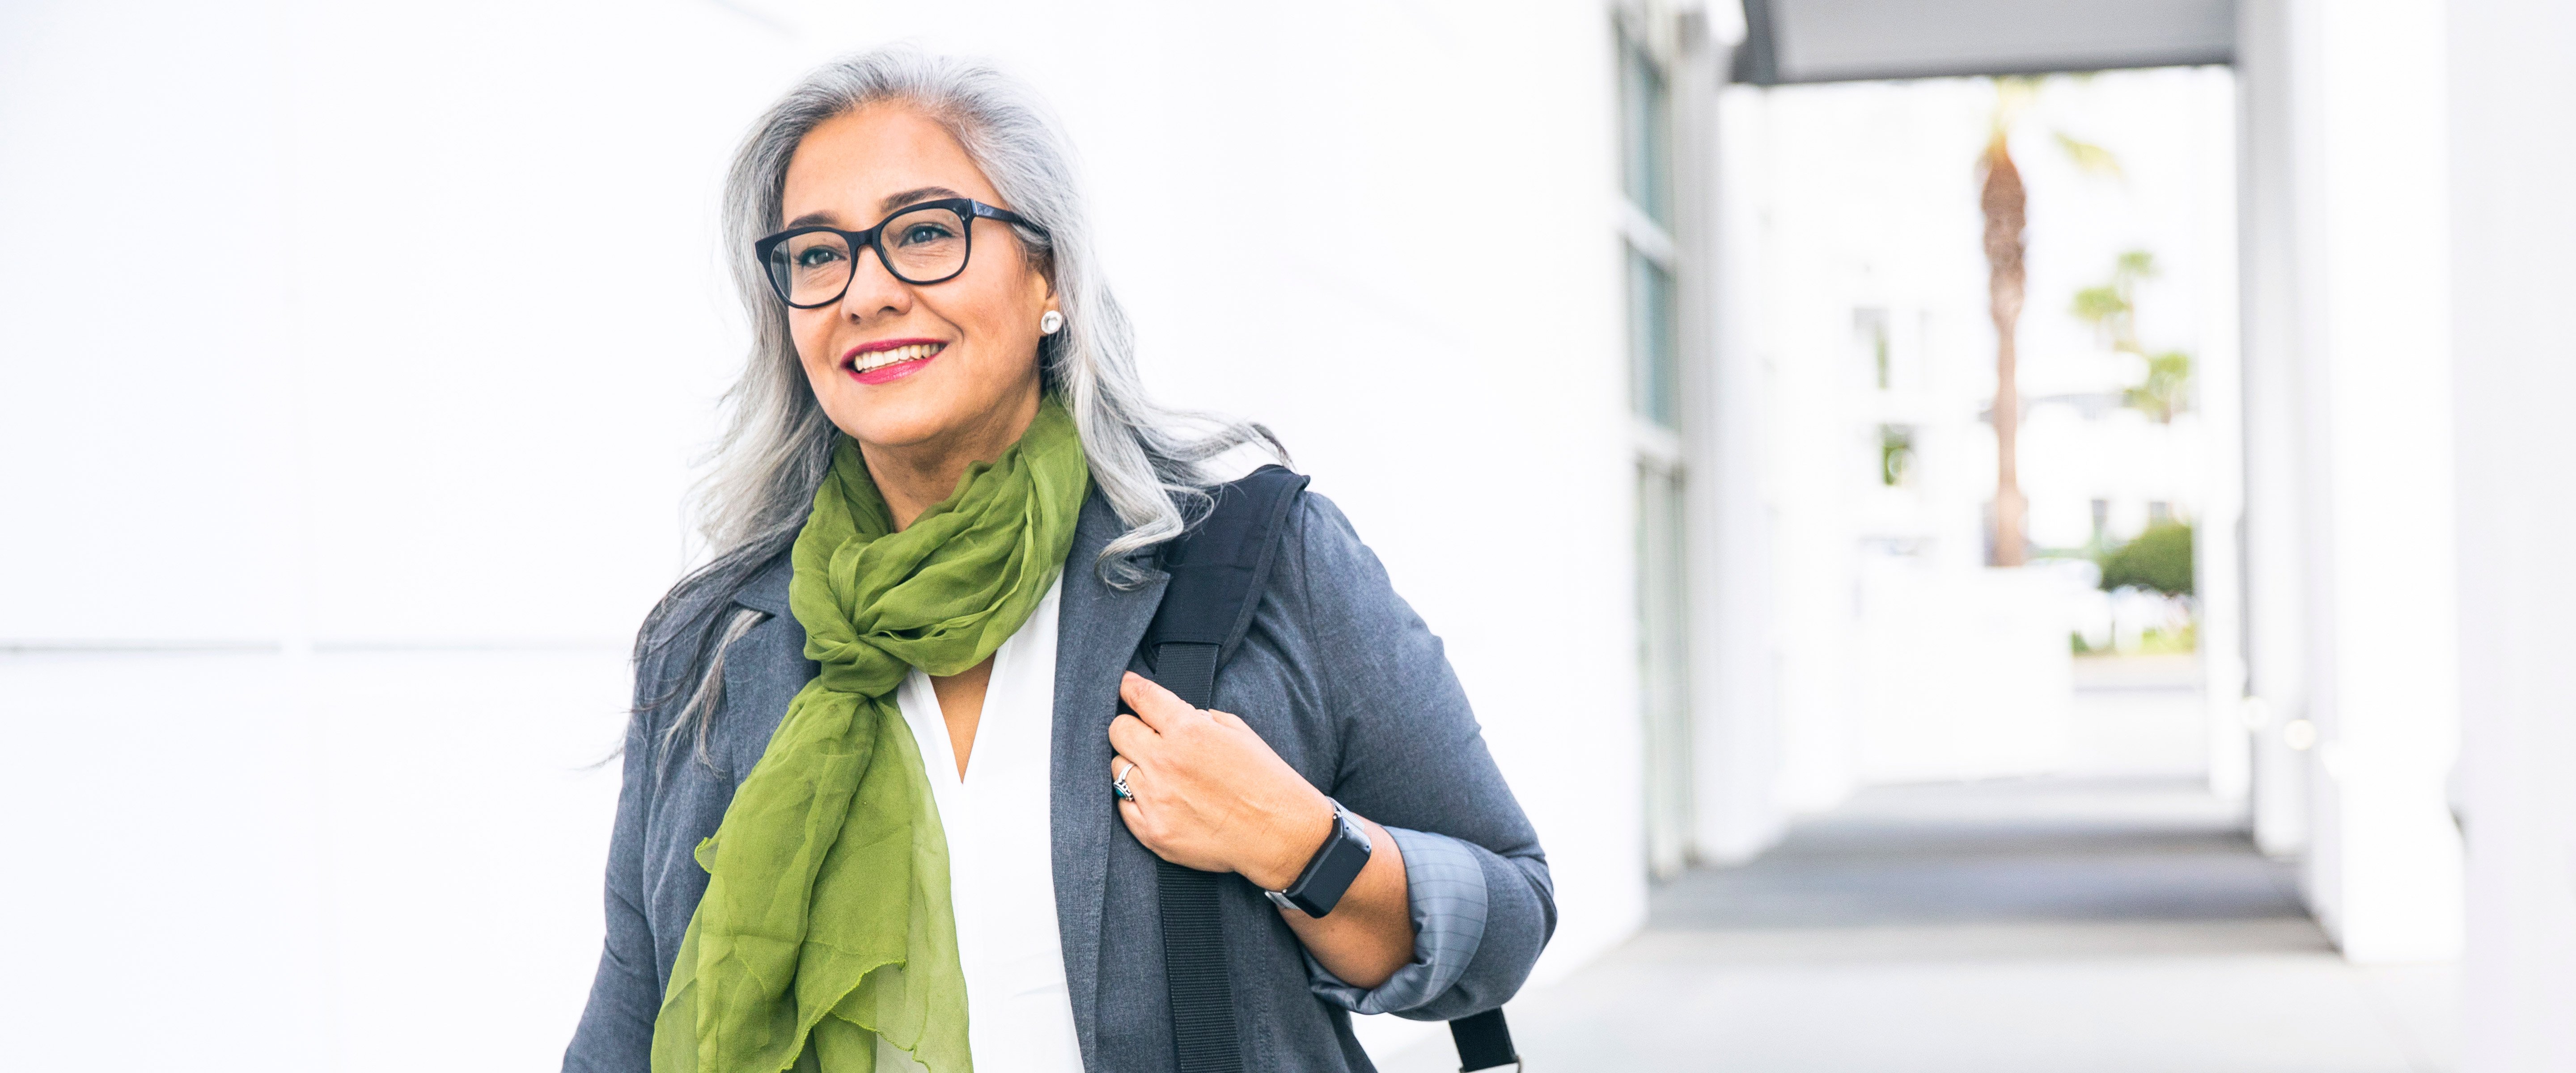 older woman going out wearing scarf, backpack, and smart watch